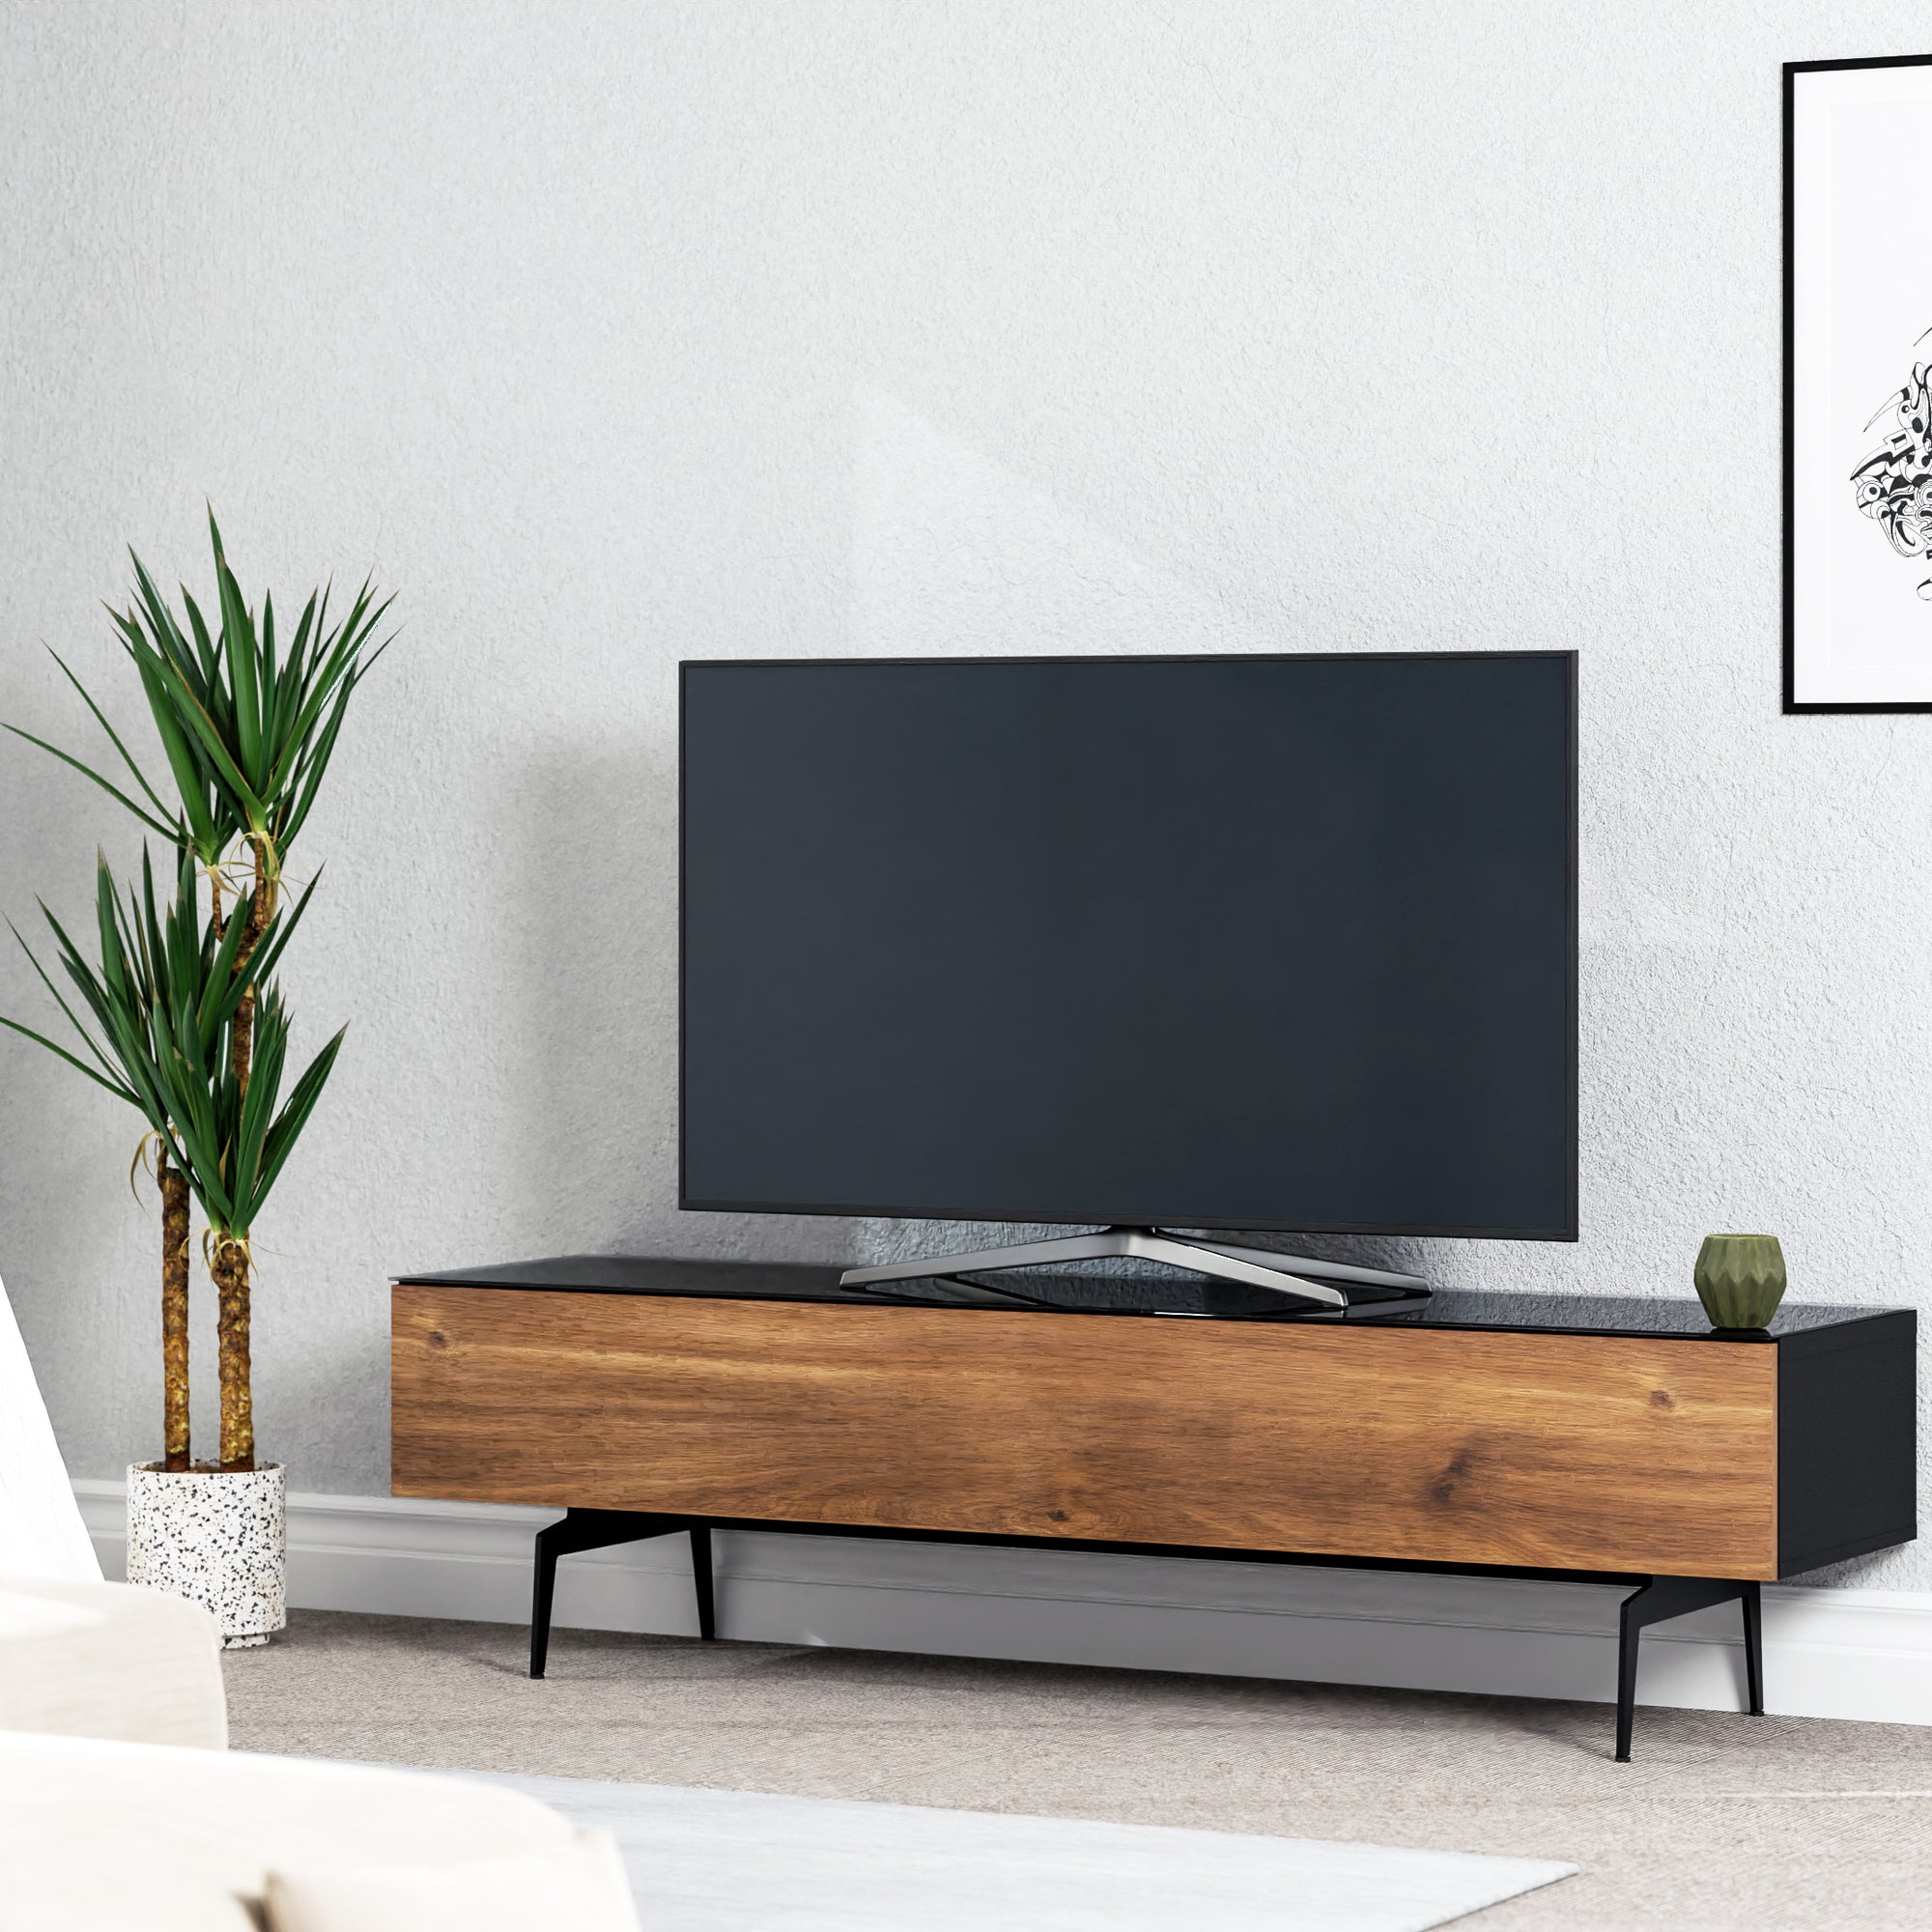 Sonorous Studio ST360 Modern TV Stand w/ Spike Legs for TVs up to 75" - Black / Walnut Wood Cover